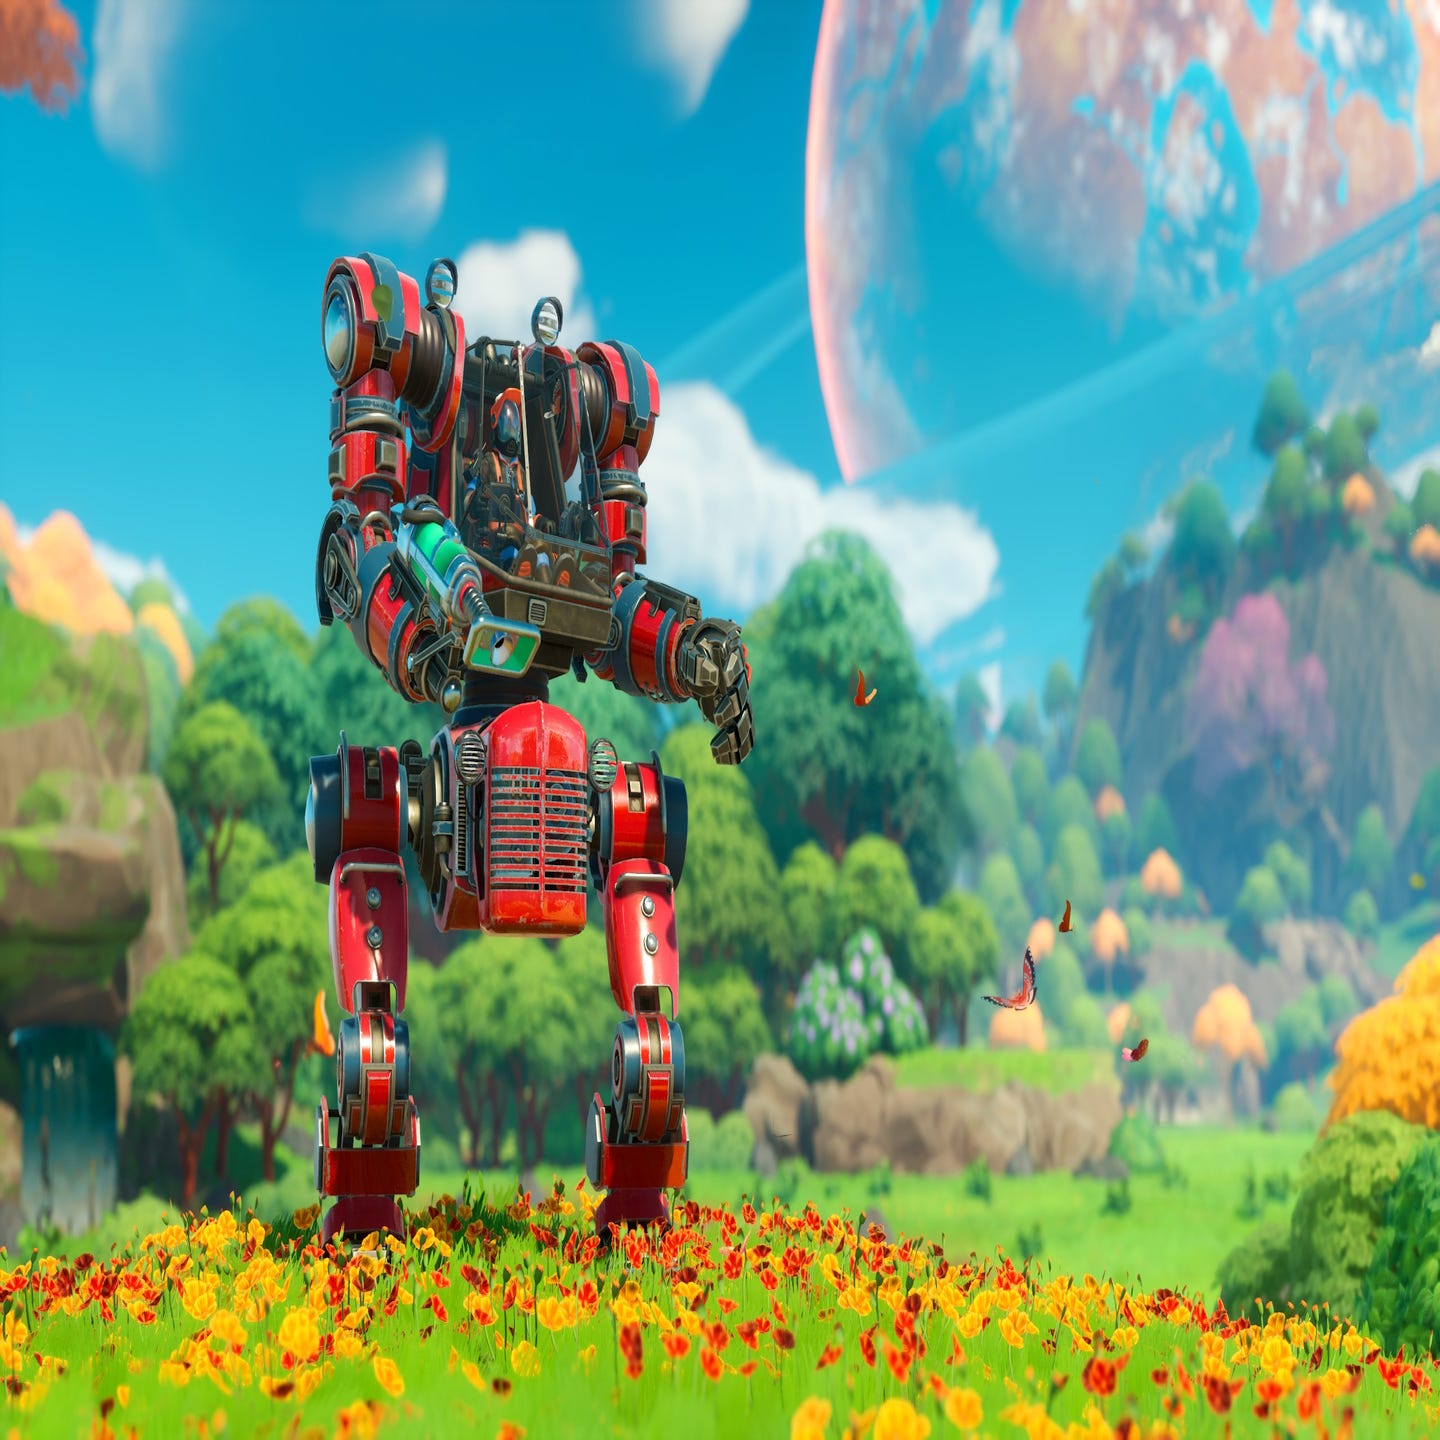 Game Pass's most exciting new addition in March is a farming sim with mechs